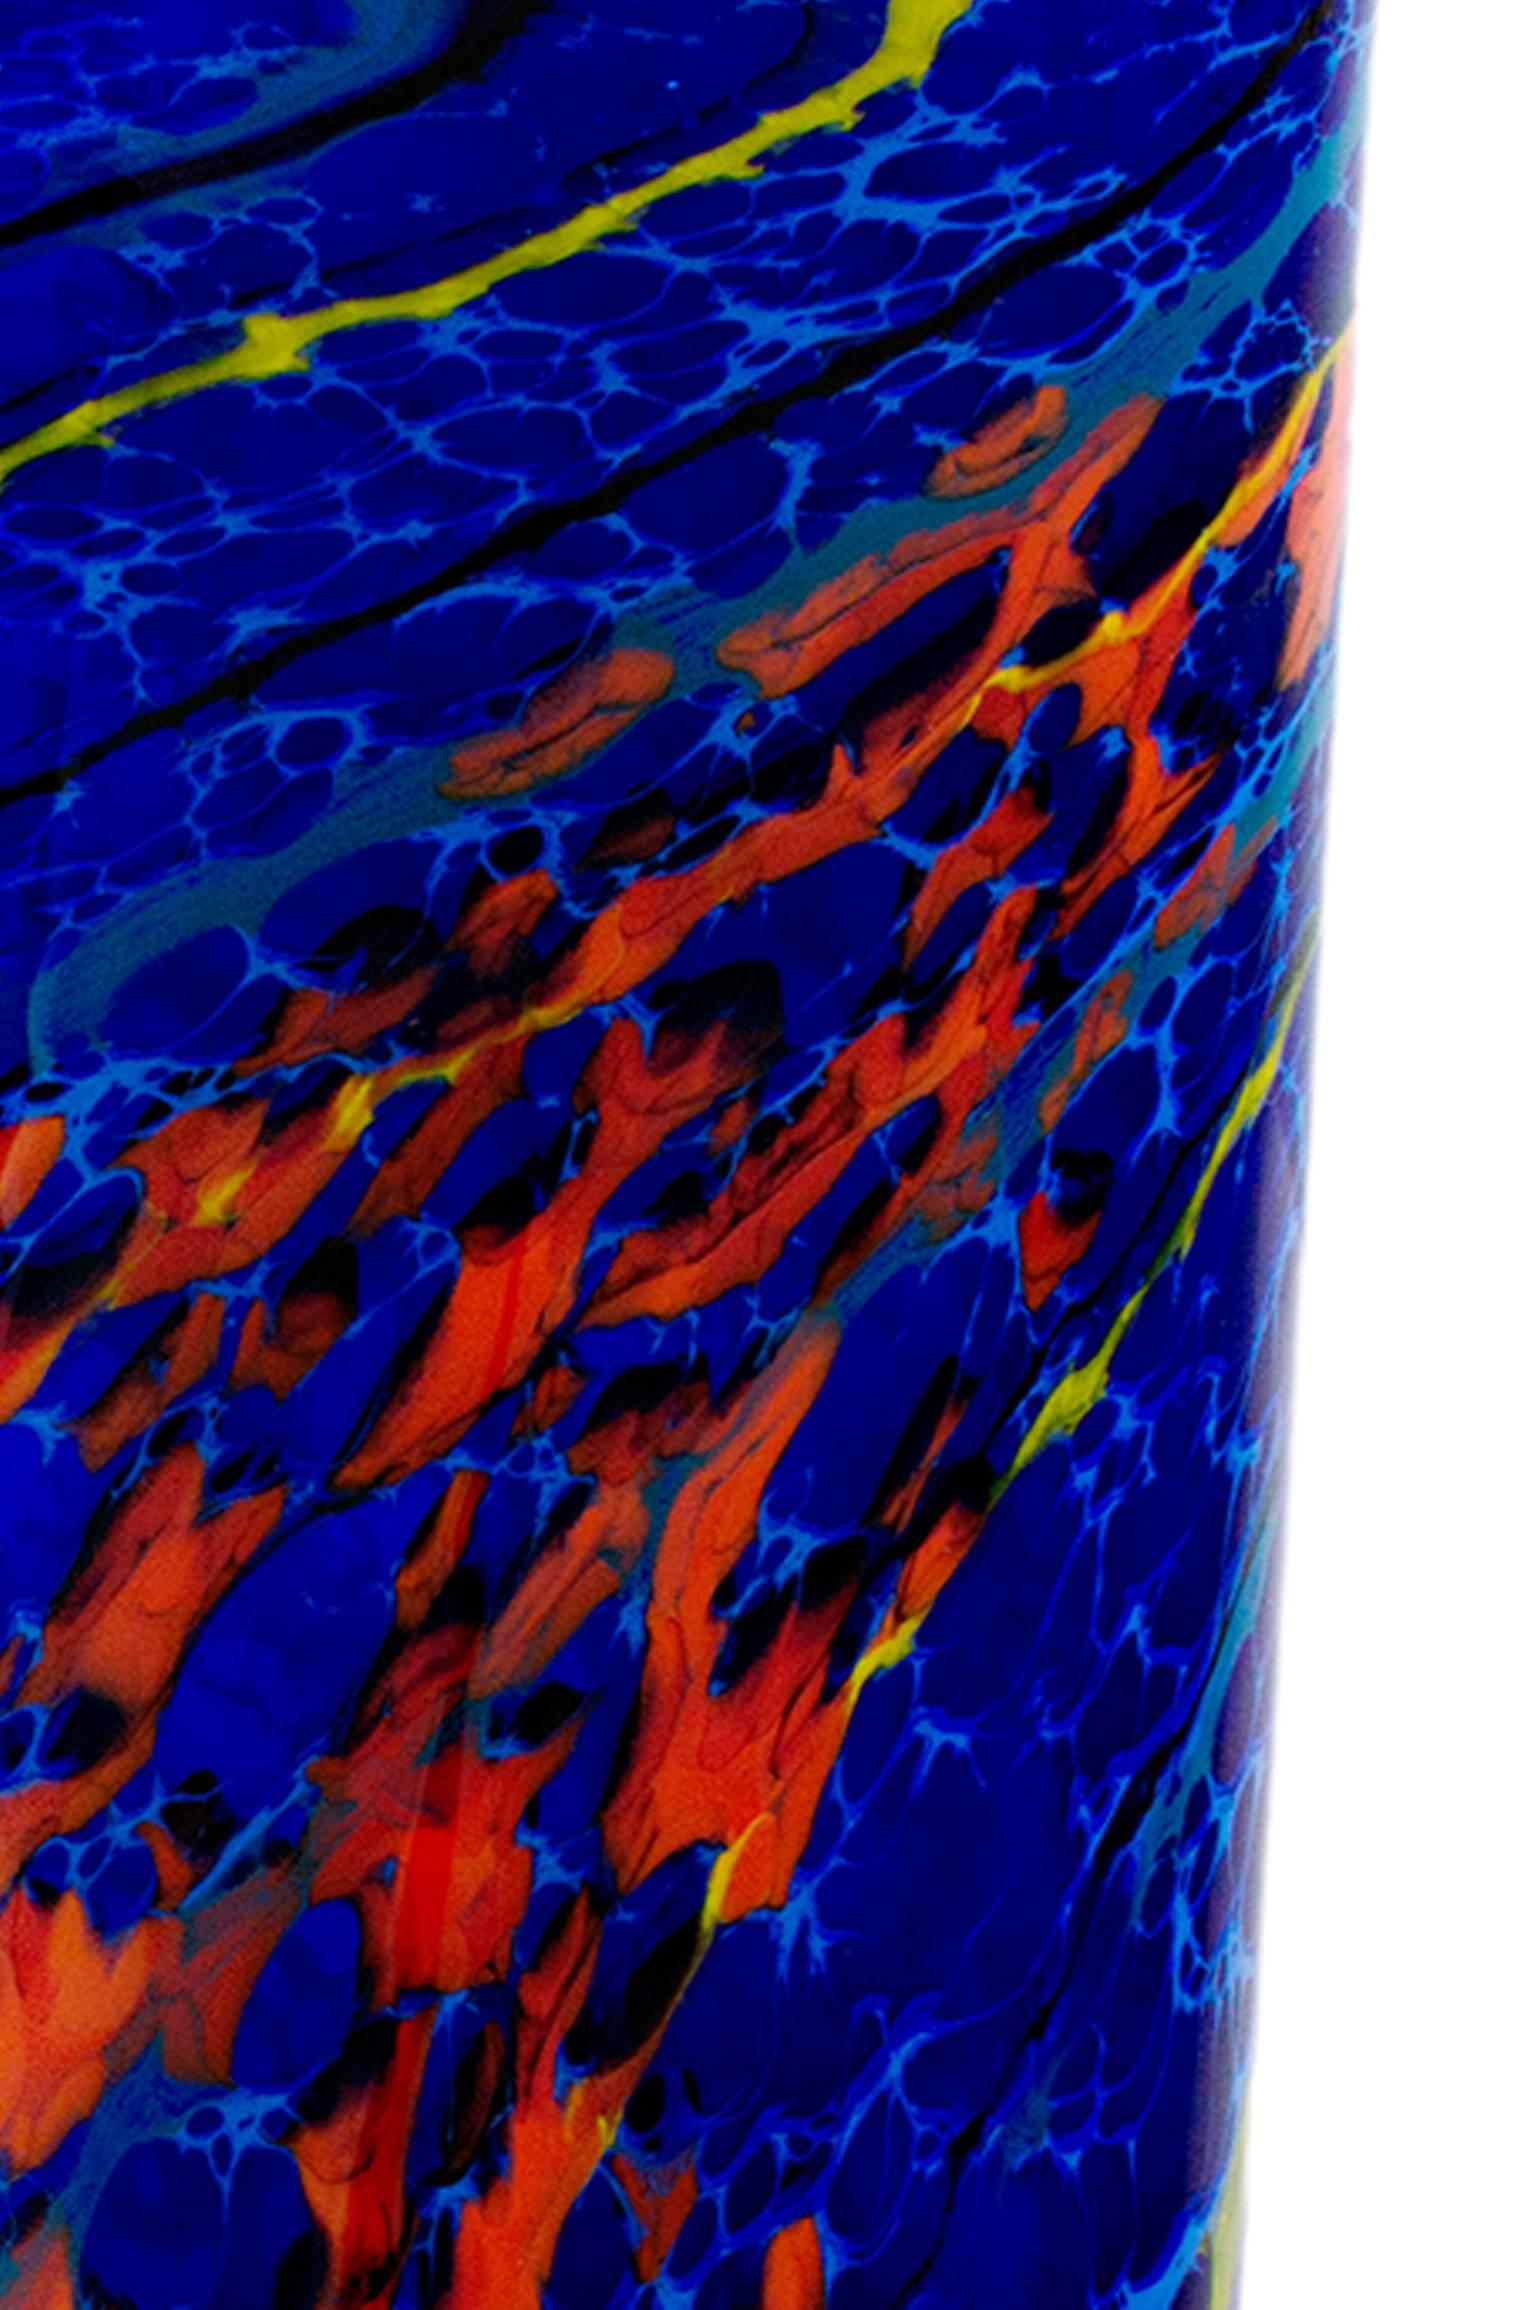 This piece is a hand blown glass vase by Ioan Nemtoi. The vase is a deep blue blue and has flecks of bright red and lines of yellow, black, and gray throughout. 

16